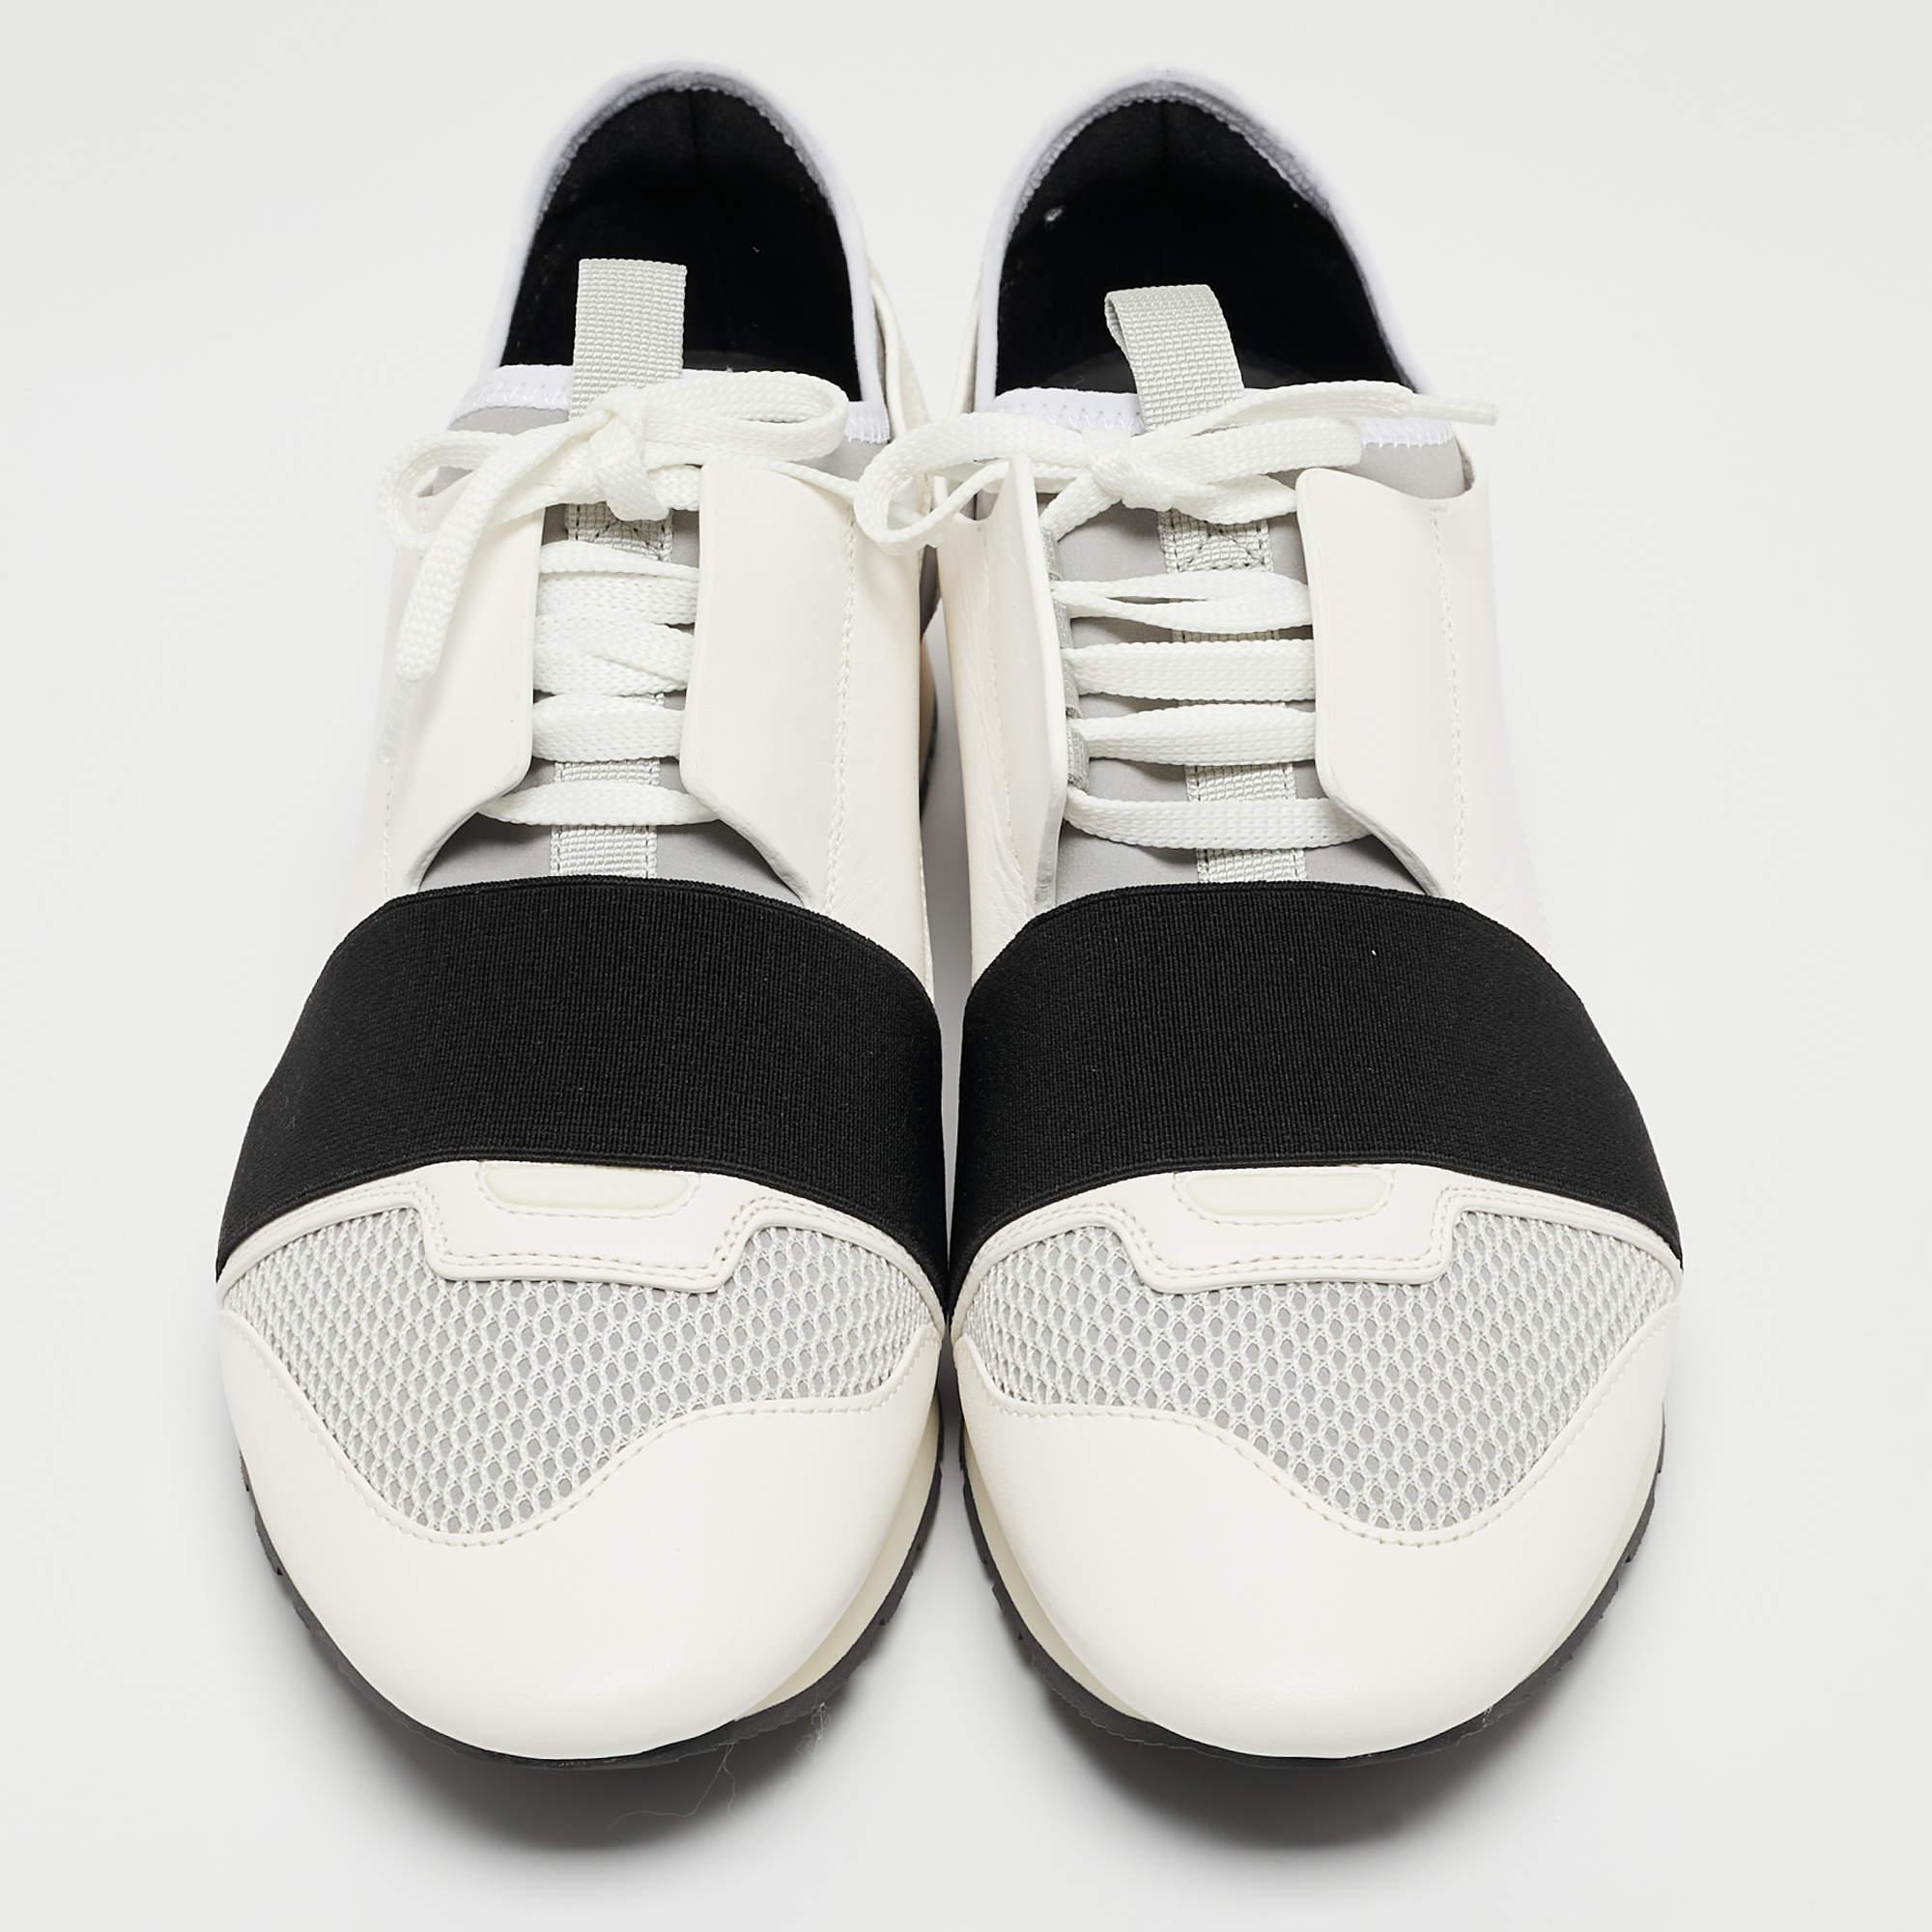 Elevate your footwear game with these designer sneakers. Combining high-end aesthetics and unmatched comfort, these sneakers are a symbol of modern luxury and impeccable taste.

Includes
Original Dustbag, Original Box